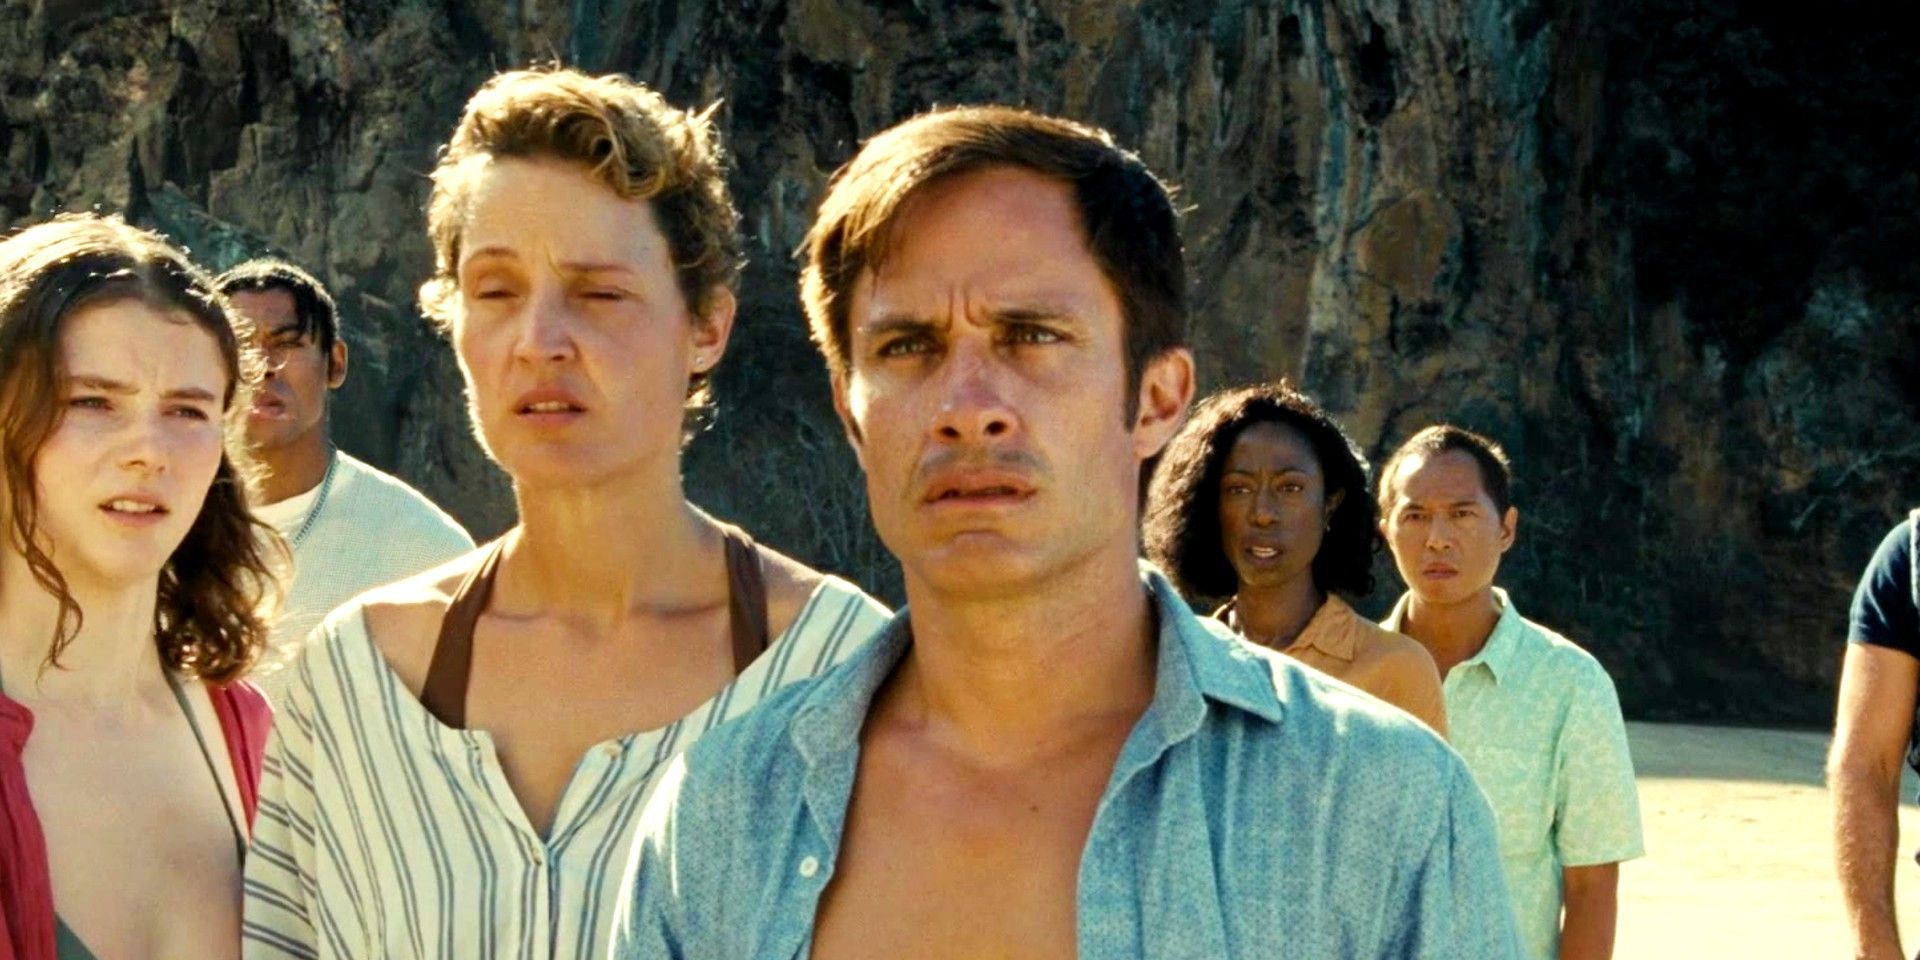 A shocked Guy with a confused Prisca and Maddox while at the beach in the movie Old